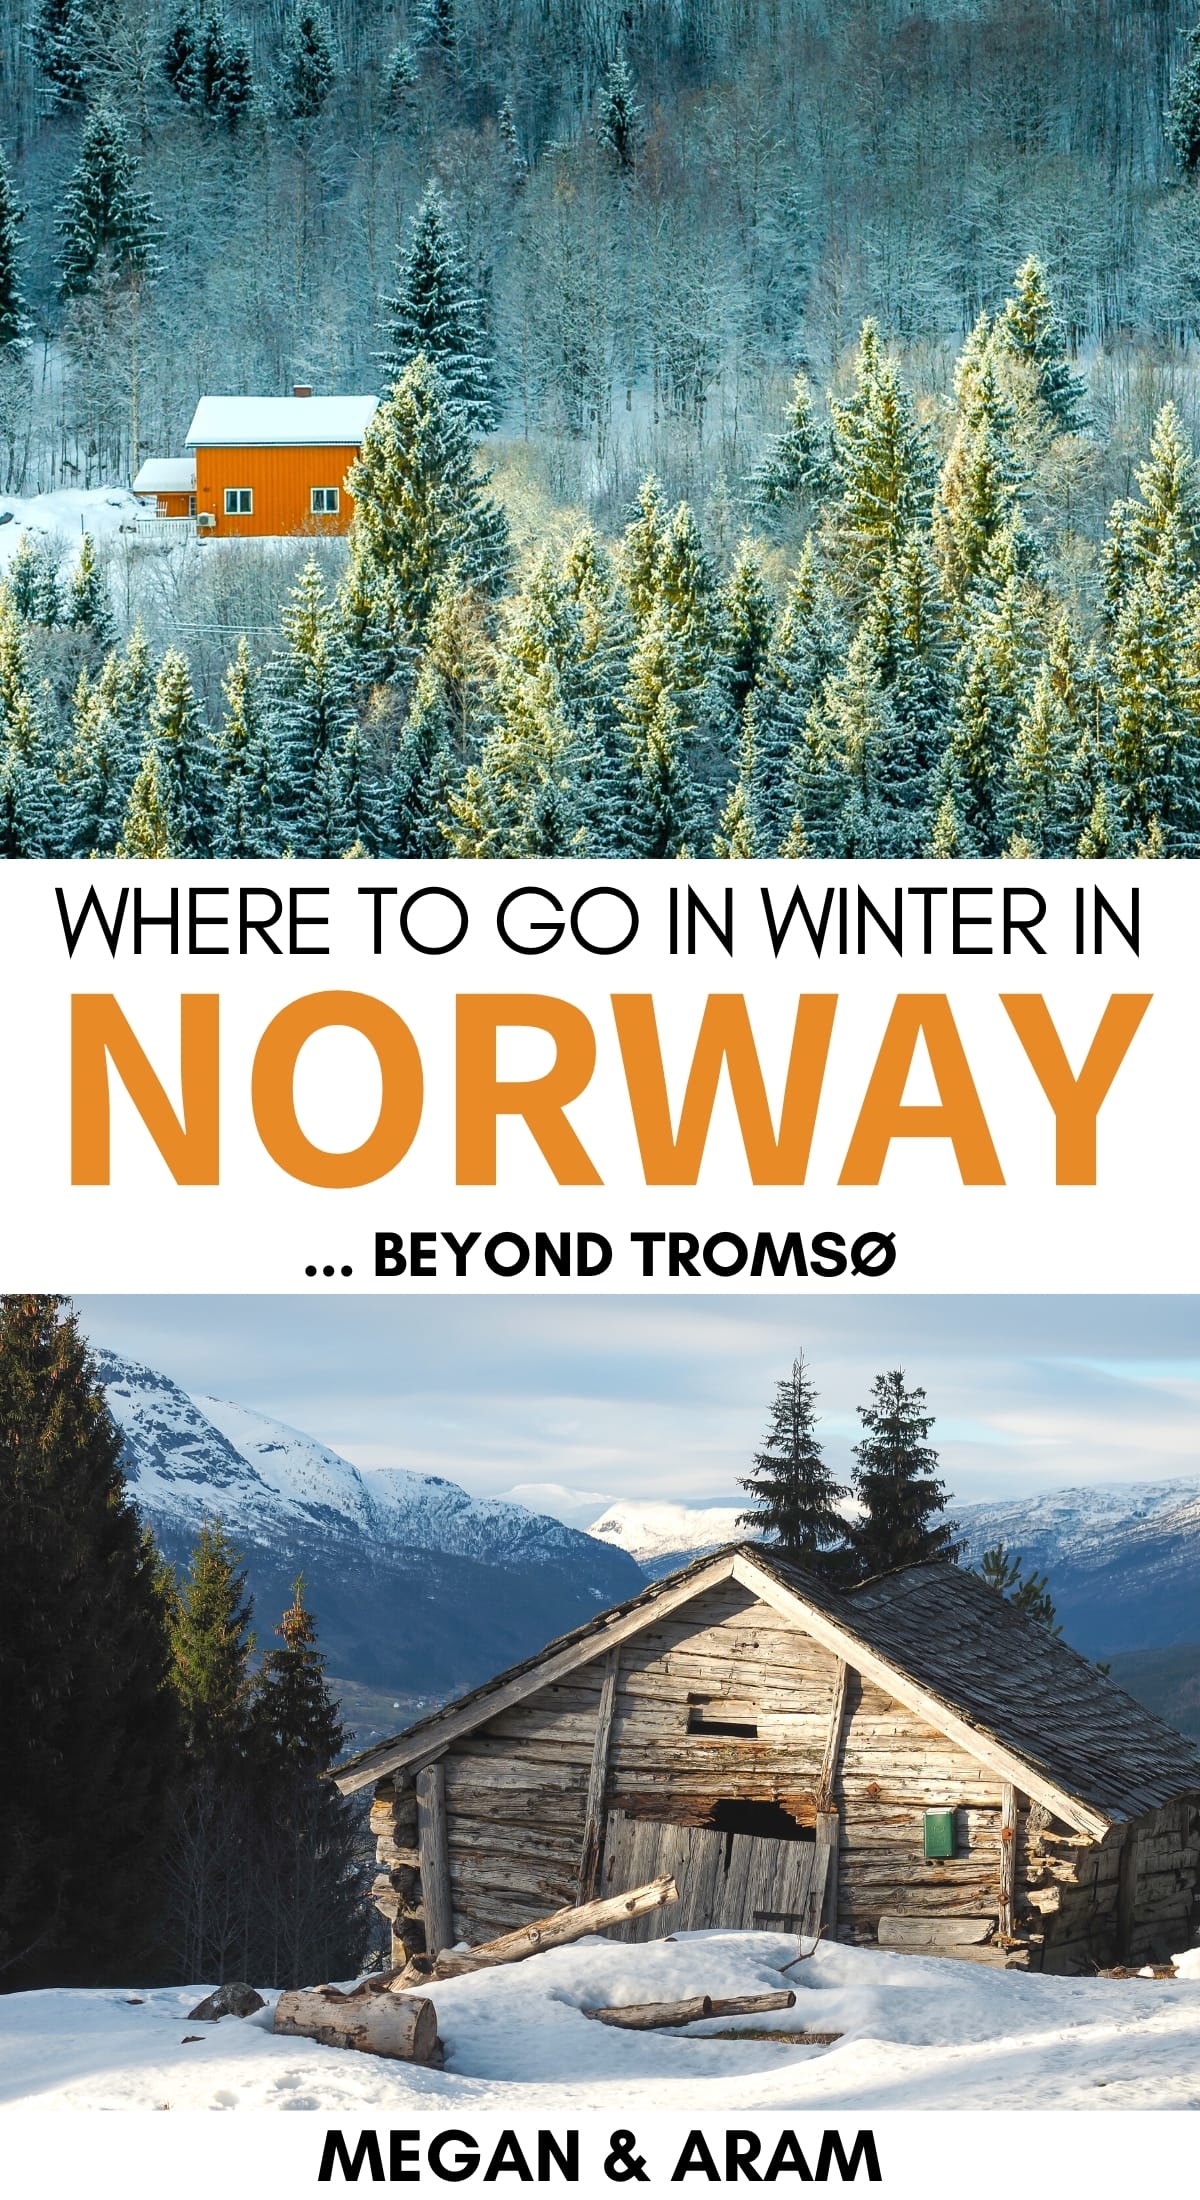 Considering a trip to Norway in winter? This guide will walk you through the best places to visit in Norway in winter and tell you the pros and cons of each. Tromsø excluded! | Places to visit in Norway | Norway in winter | Norway winter trips | Norway winter destinations | Tromsø | Lofoten Islands | Bergen | Oslo | Northern lights in Norway | Where to see the northern lights in Norway | Visit Norway | Winter in Norway | Christmas in Norway | Norway in December | Norway destinations | Norway nature